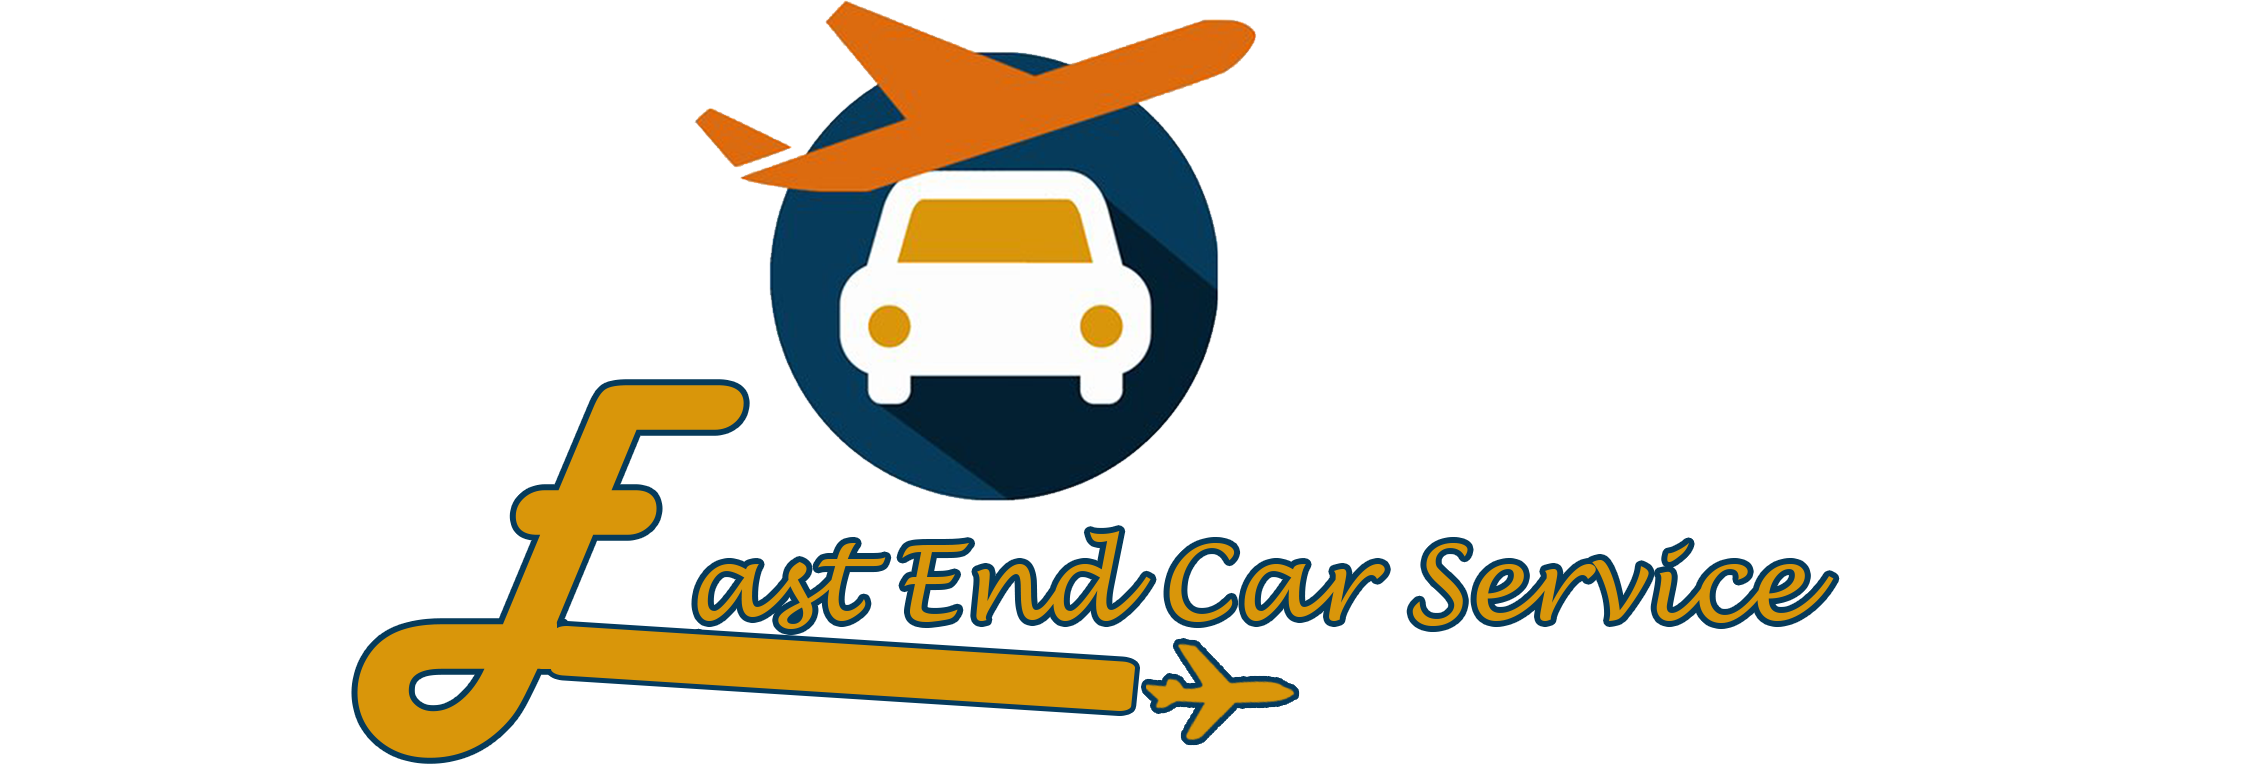 Long Island Airport Car Service - New York Other